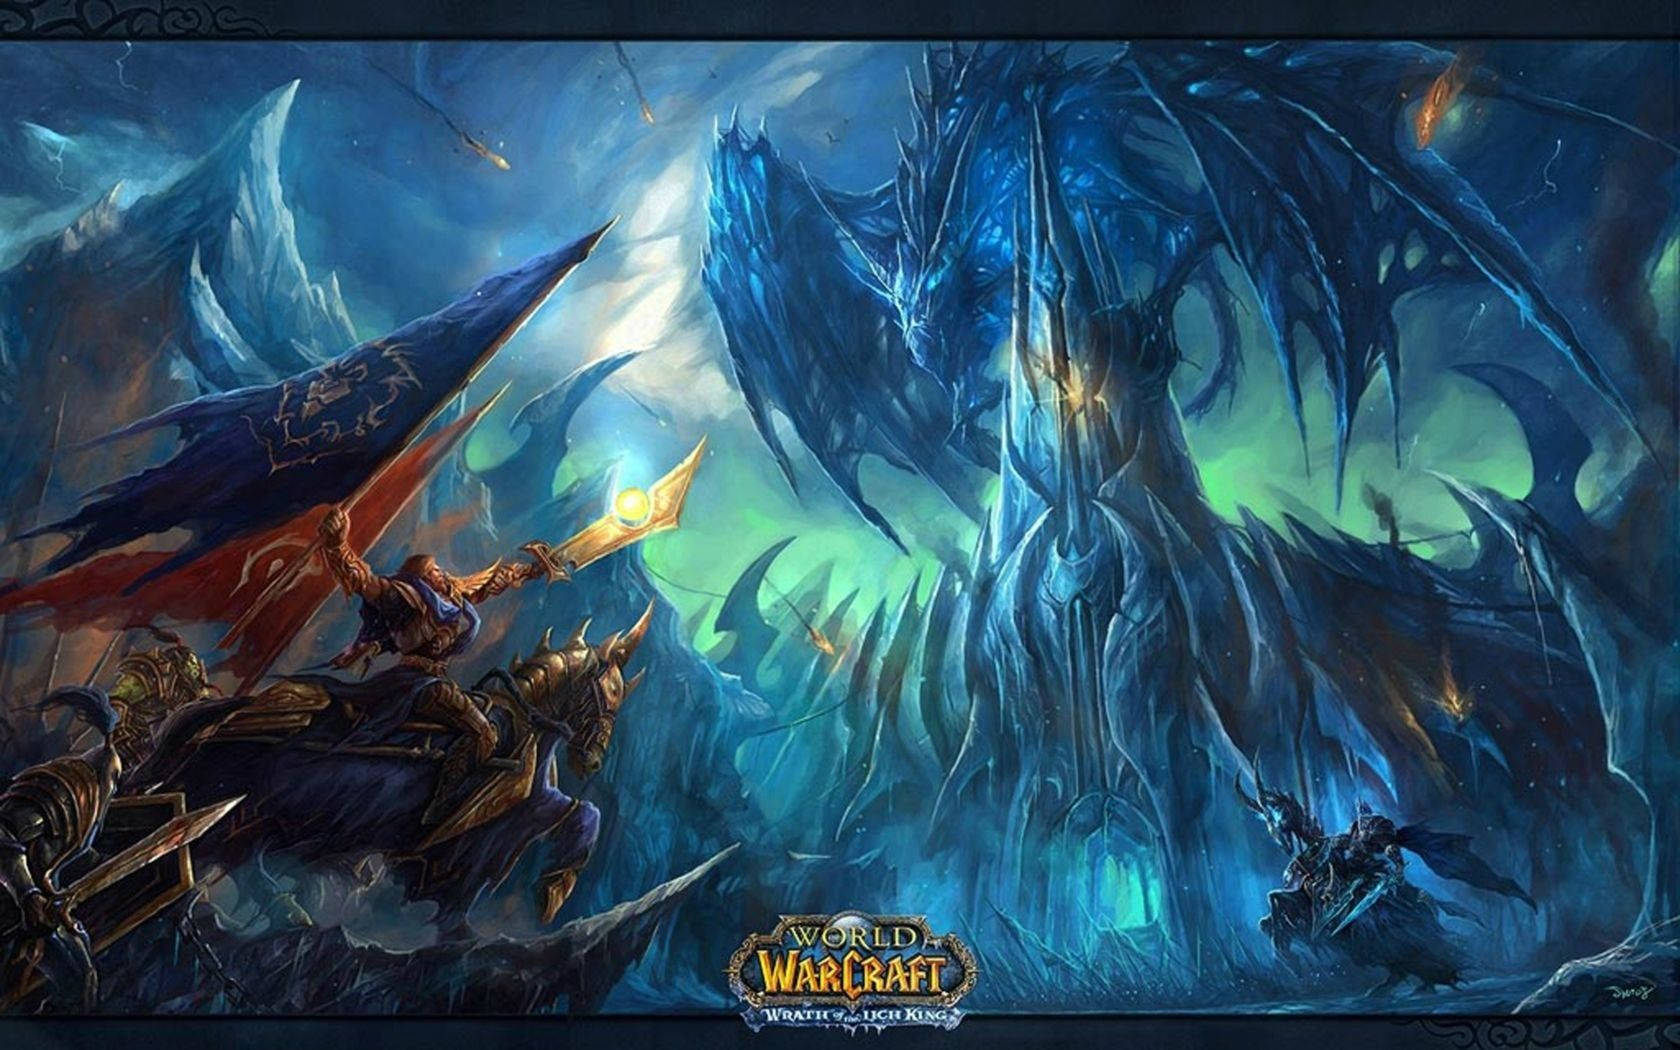 Download WoW Epic Battle Lich King Wallpaper | Wallpapers.com